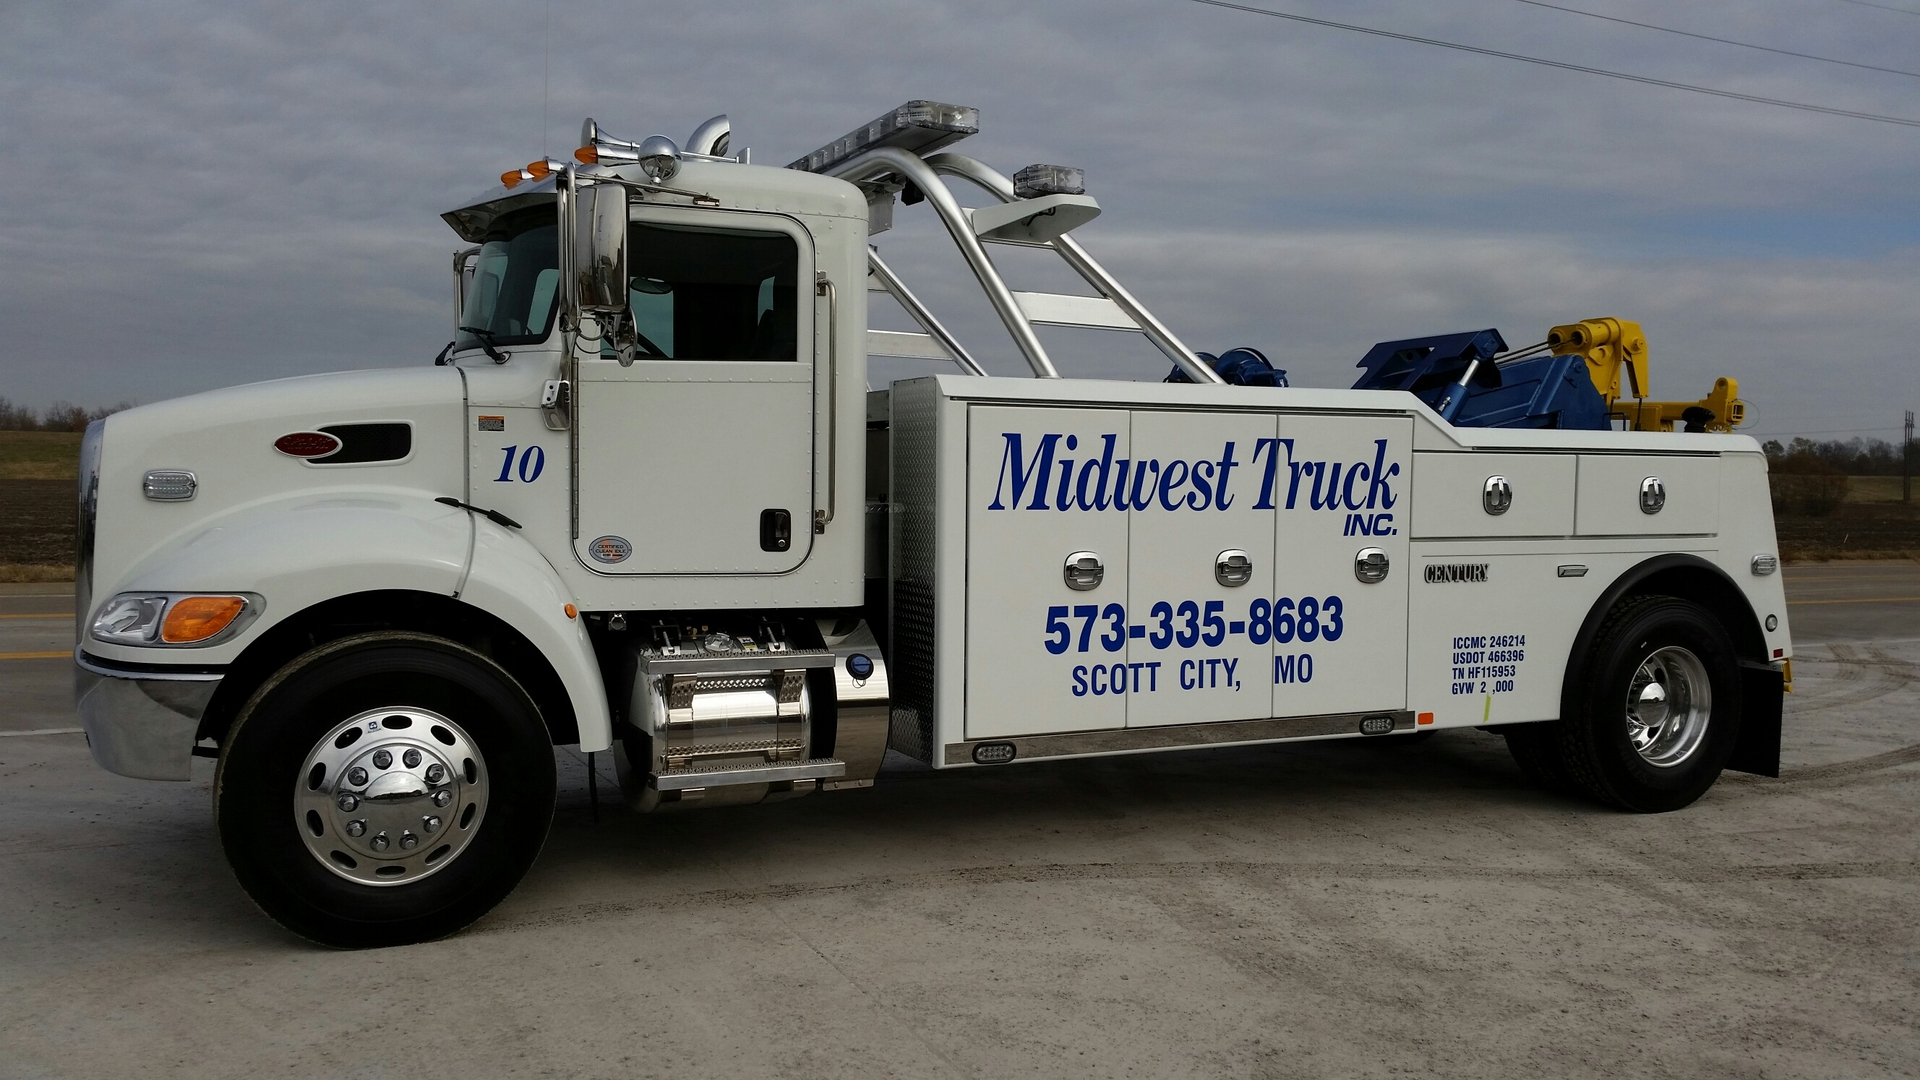 Midwest Truck Inc Tow Truck Hd Wallpaper Background Image 1920x1080